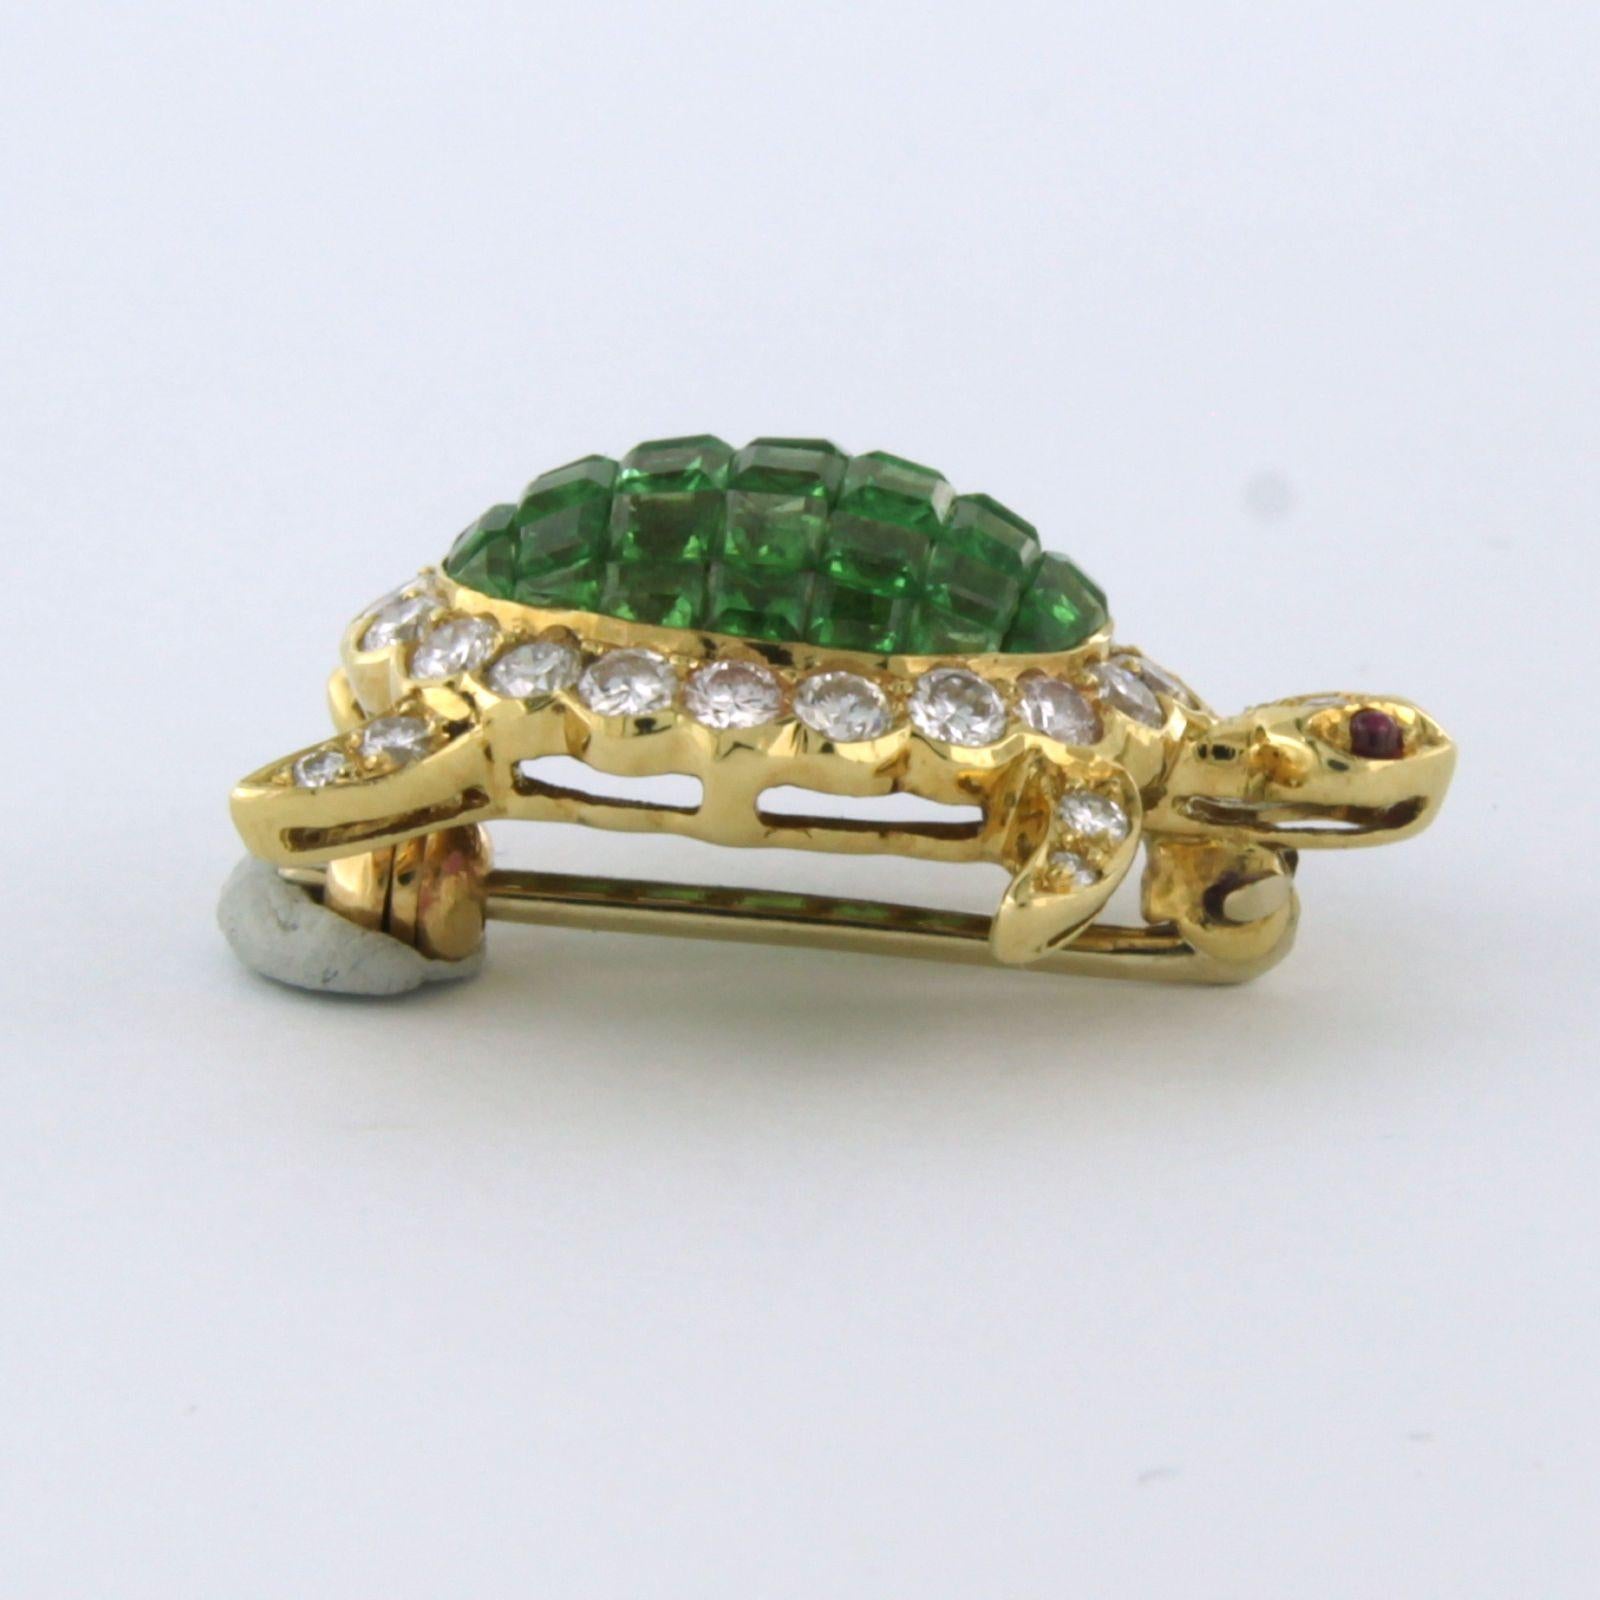 18k yellow gold brooch in the shape of a tortoise set with peridot, ruby ​​in the eyes and brilliant cut diamonds. 0.85ct - F/G - VS/SI

detailed description:

the size of the brooch is 2.3 cm long by 1.7 cm wide and 1.0 cm high

weight 5.1